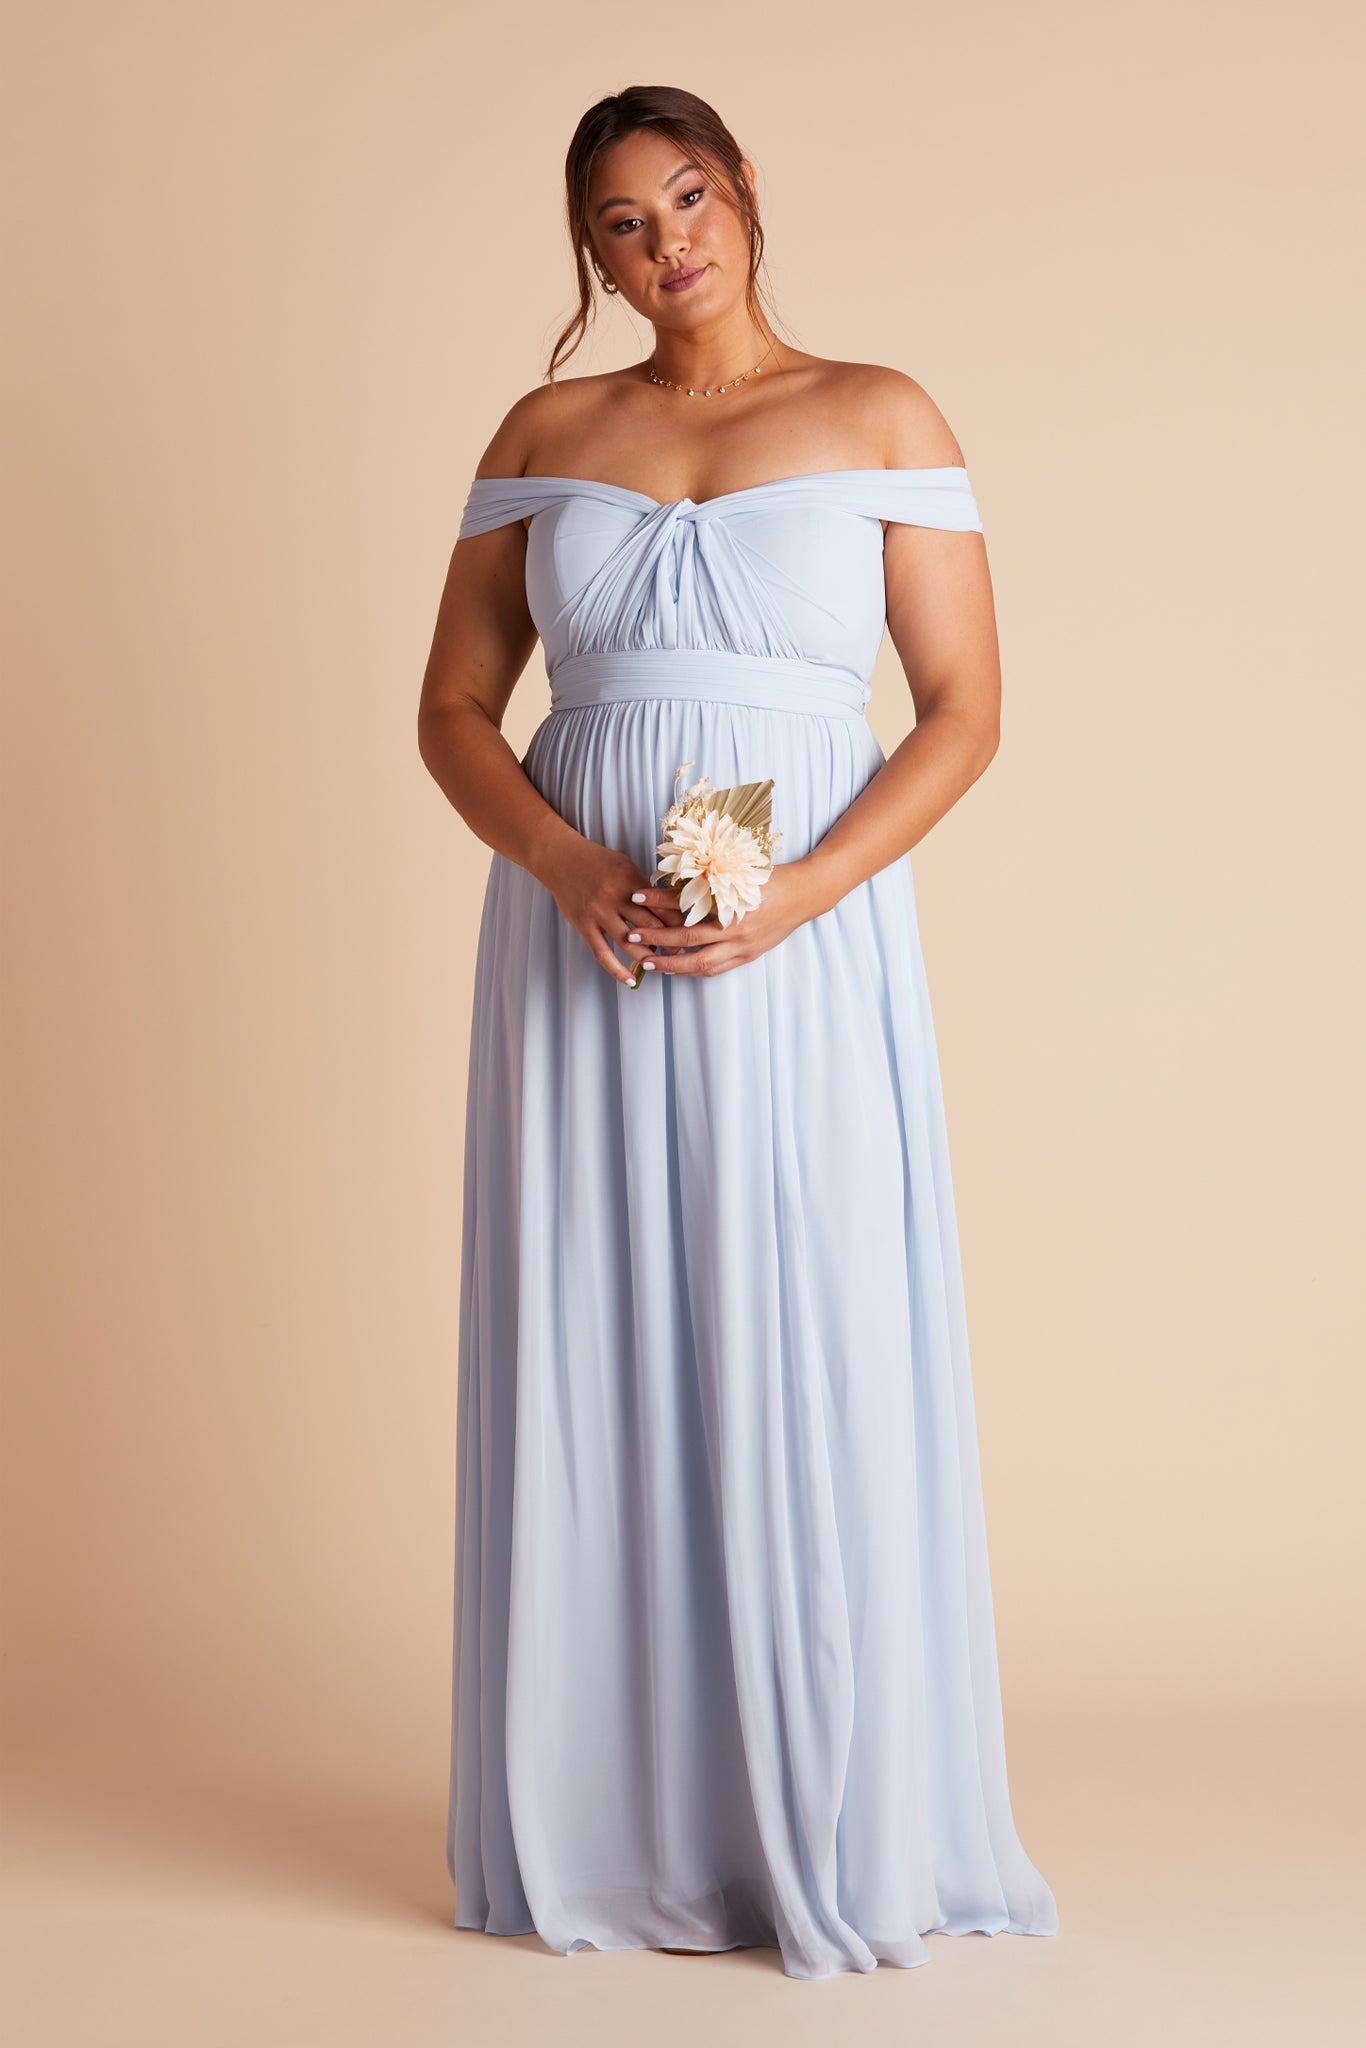 Grace convertible plus size bridesmaid dress in ice blue chiffon by Birdy Grey, front view